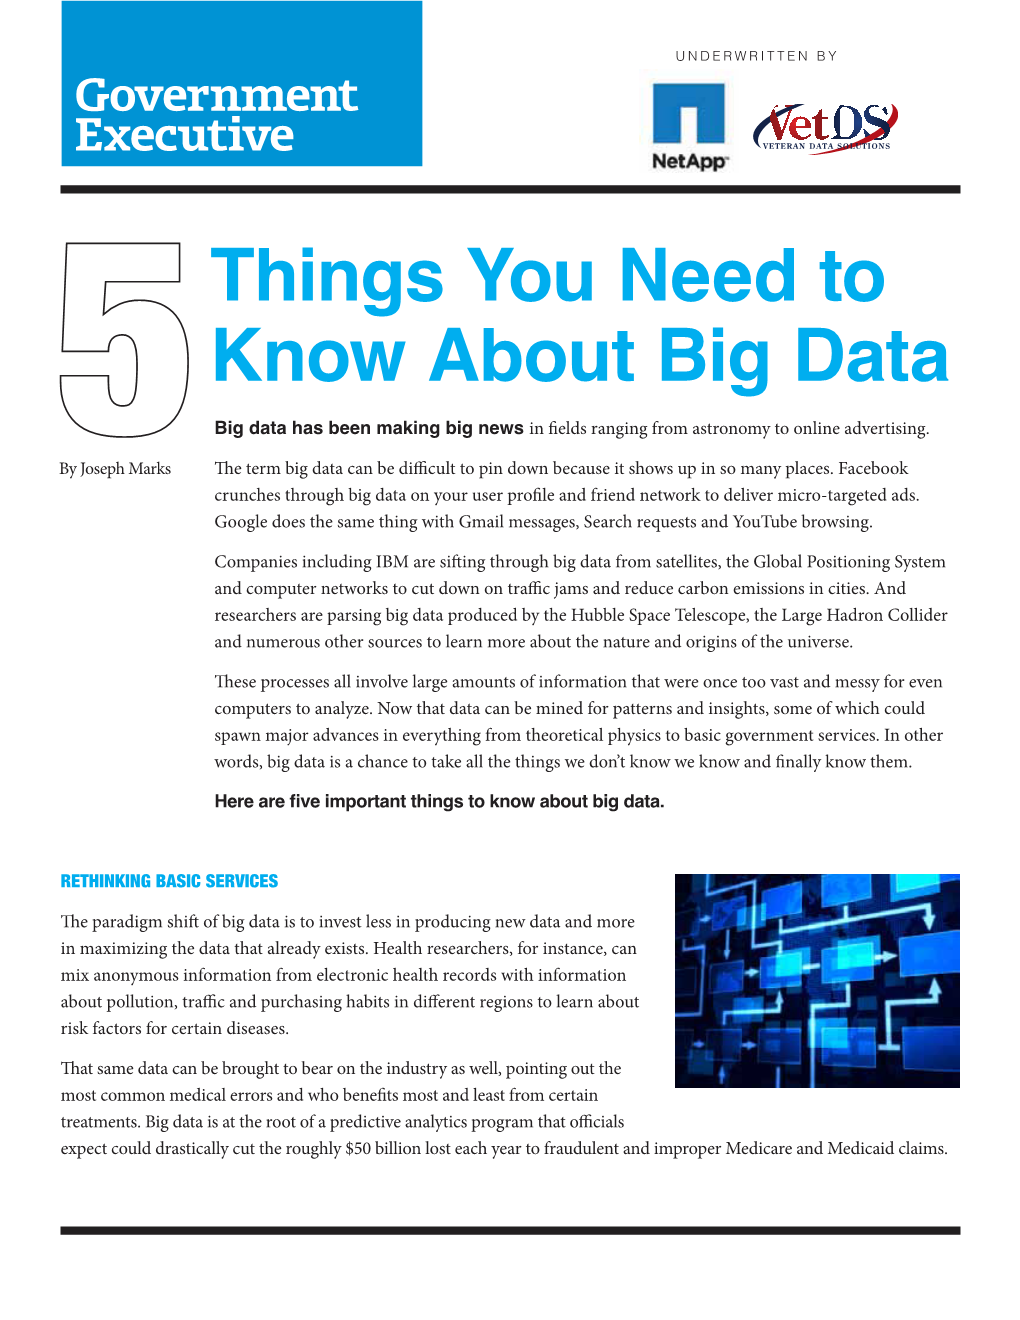 Things You Need to Know About Big Data